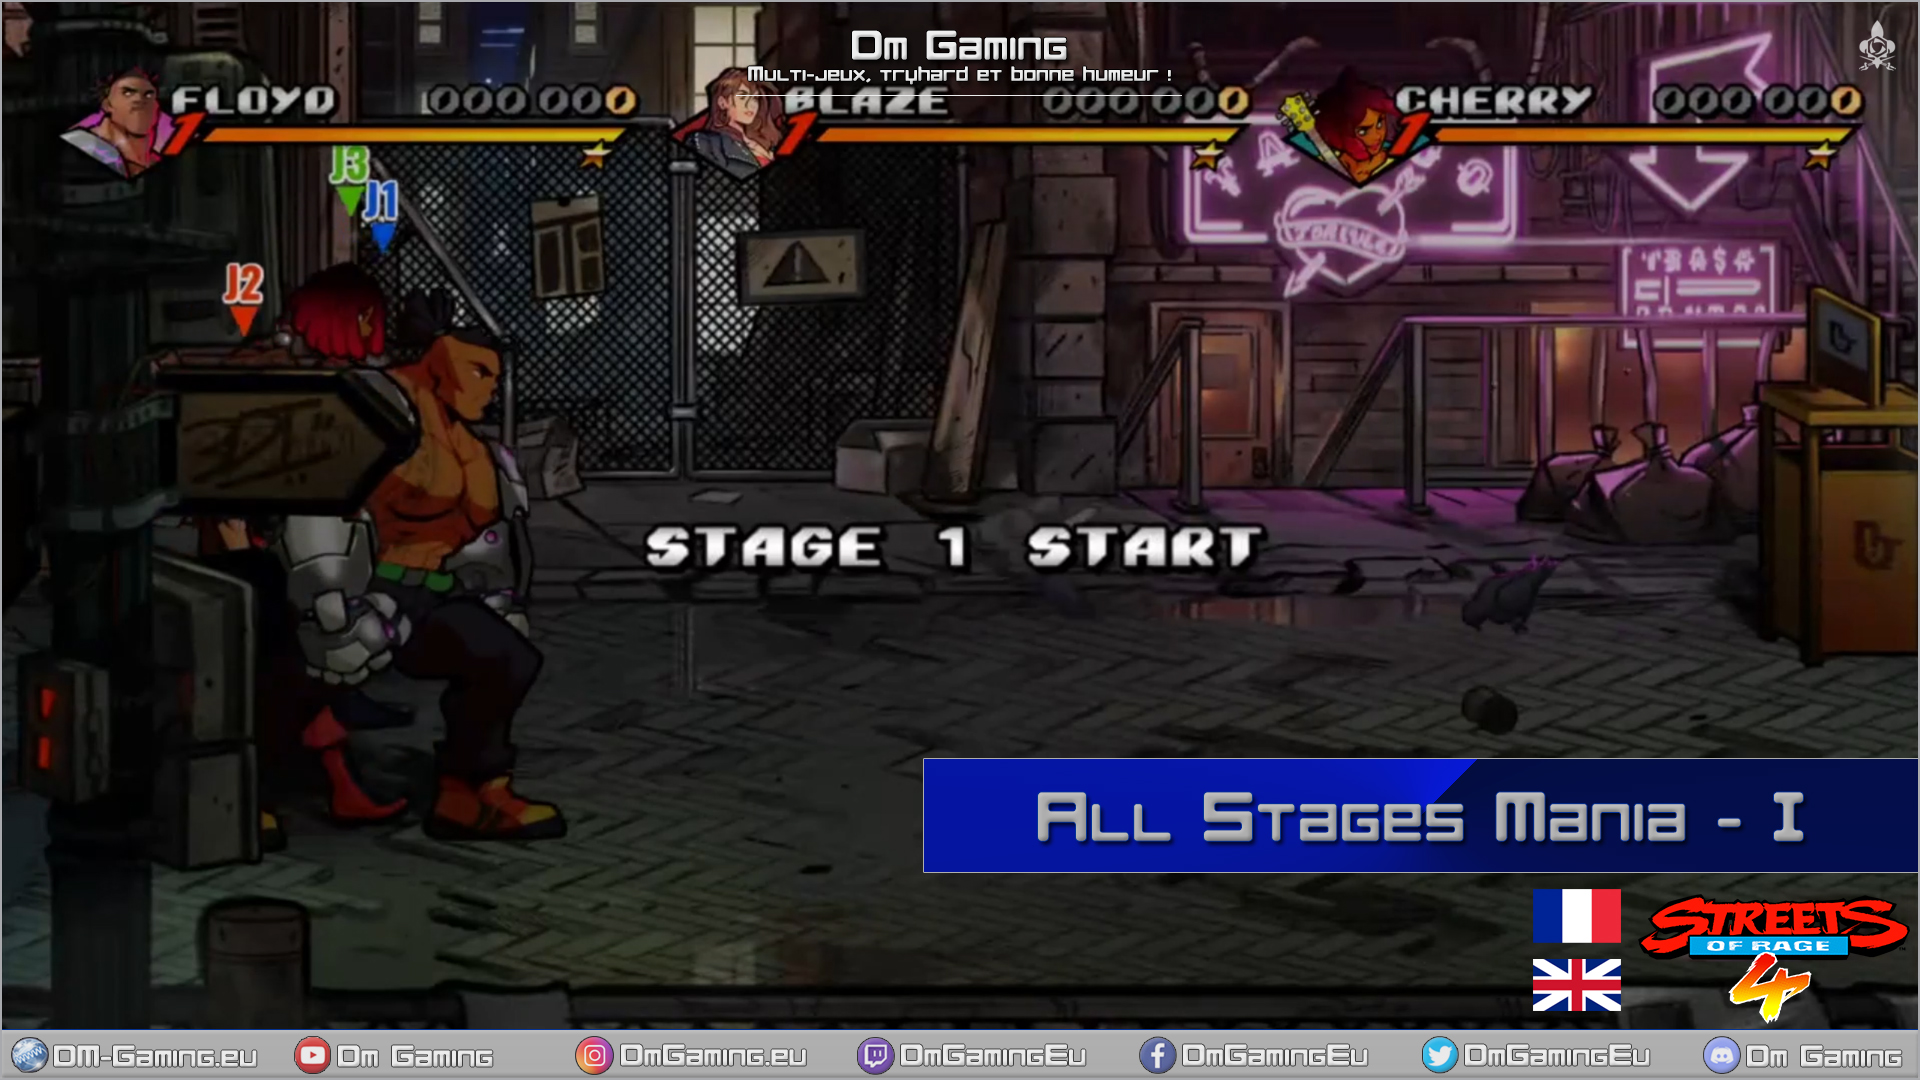 stage mania 1 streets of rage 4